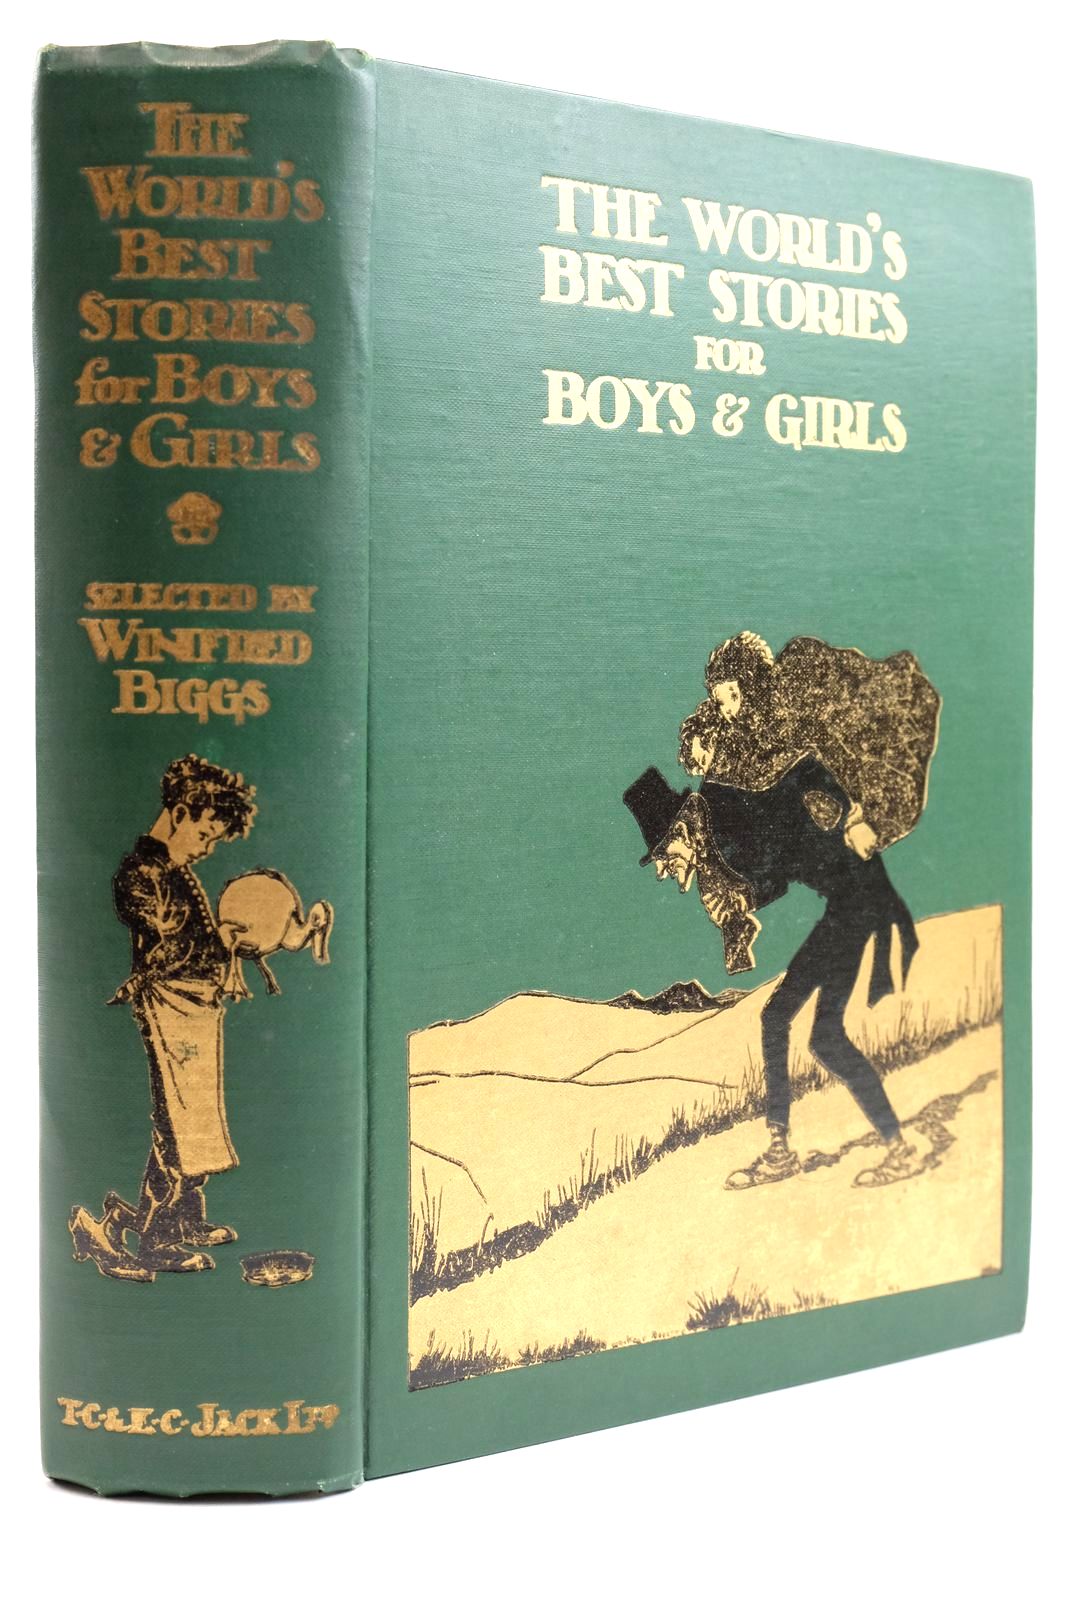 Photo of THE WORLD'S BEST STORIES FOR BOYS & GIRLS written by Biggs, Winifred illustrated by Appleton, Honor C. published by T.C. & E.C. Jack Ltd., T. Nelson & Sons (STOCK CODE: 2133906)  for sale by Stella & Rose's Books